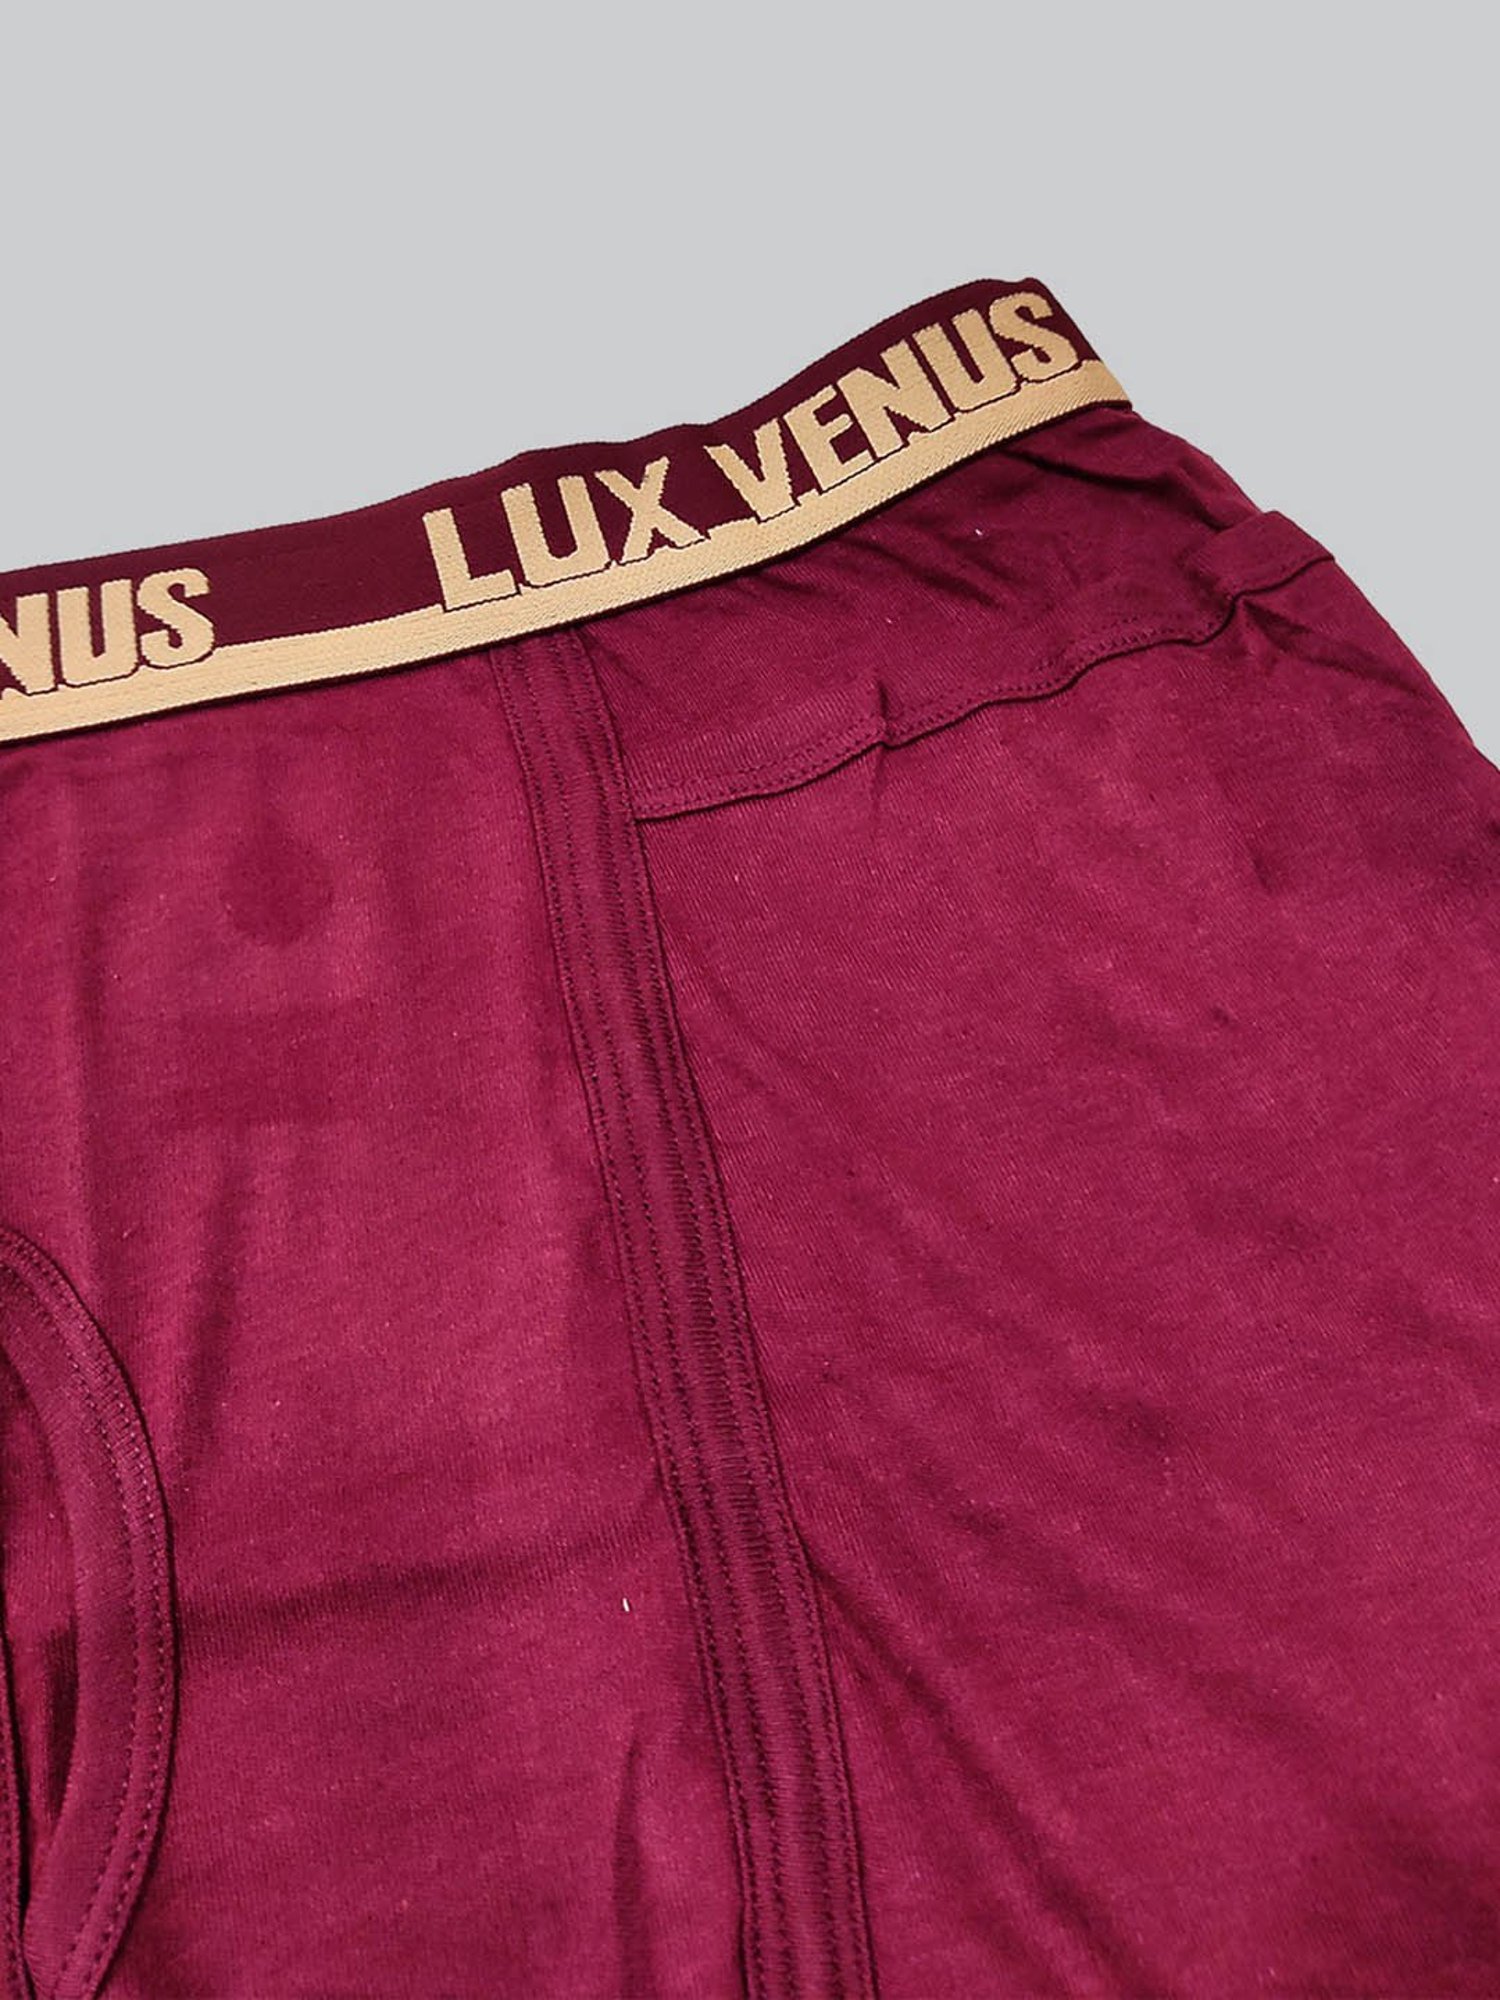 Buy LUX Venus Assorted Cotton Pocket Trunks - Pack of 2 for Men's Online @  Tata CLiQ